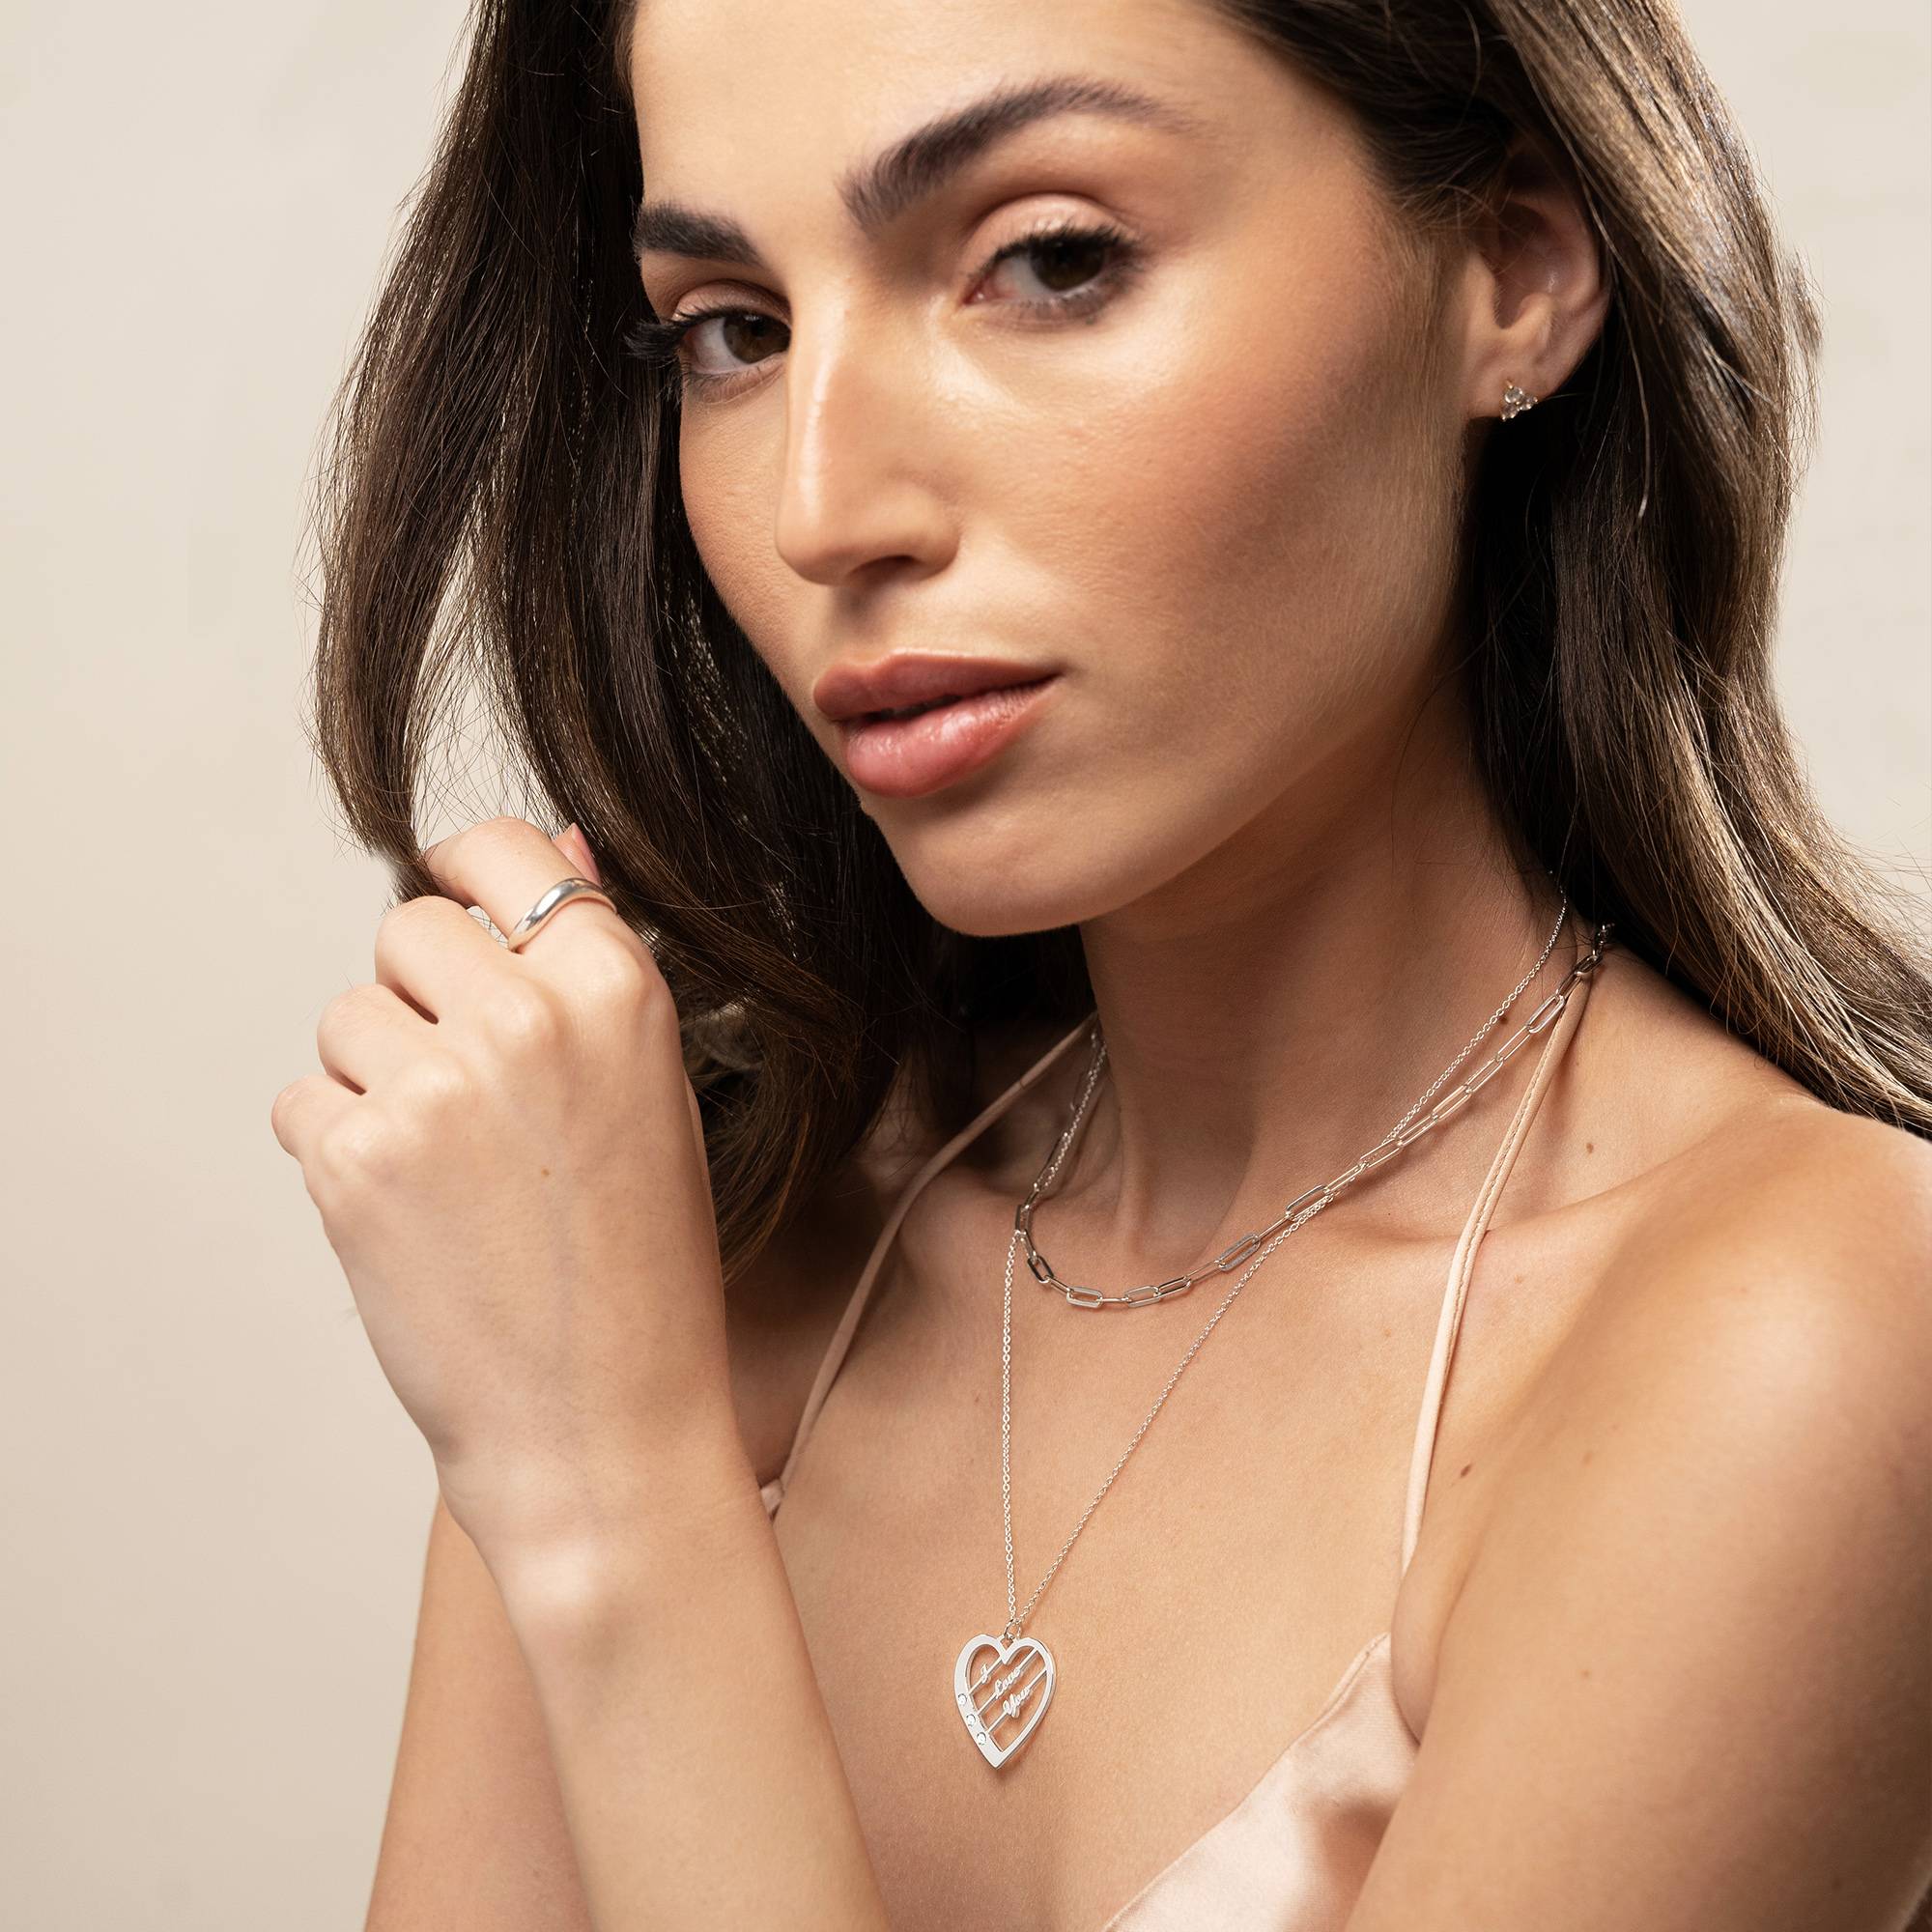 Ella Diamond Heart Necklace with Names in Sterling Silver-7 product photo